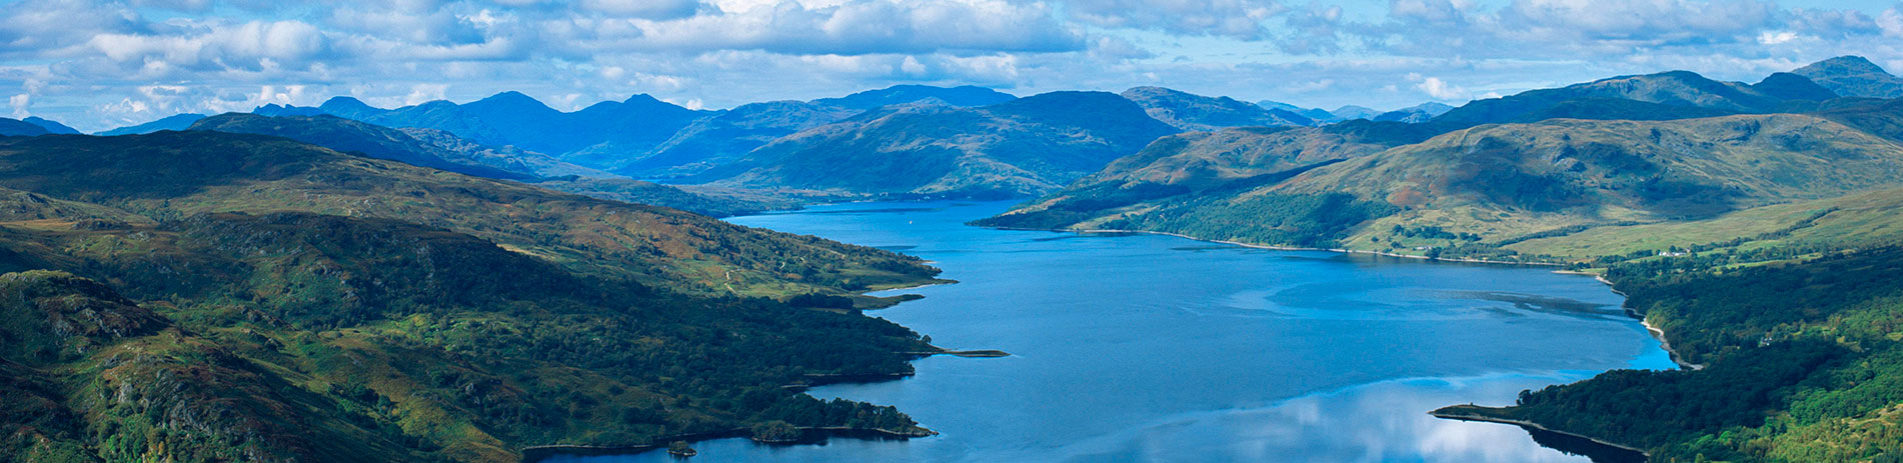 landscape-of-loch-katrine-in-deep-shade-of-blue-surrounded-by-the-forested-trossachs-mountains-and-cloudy-sky-above